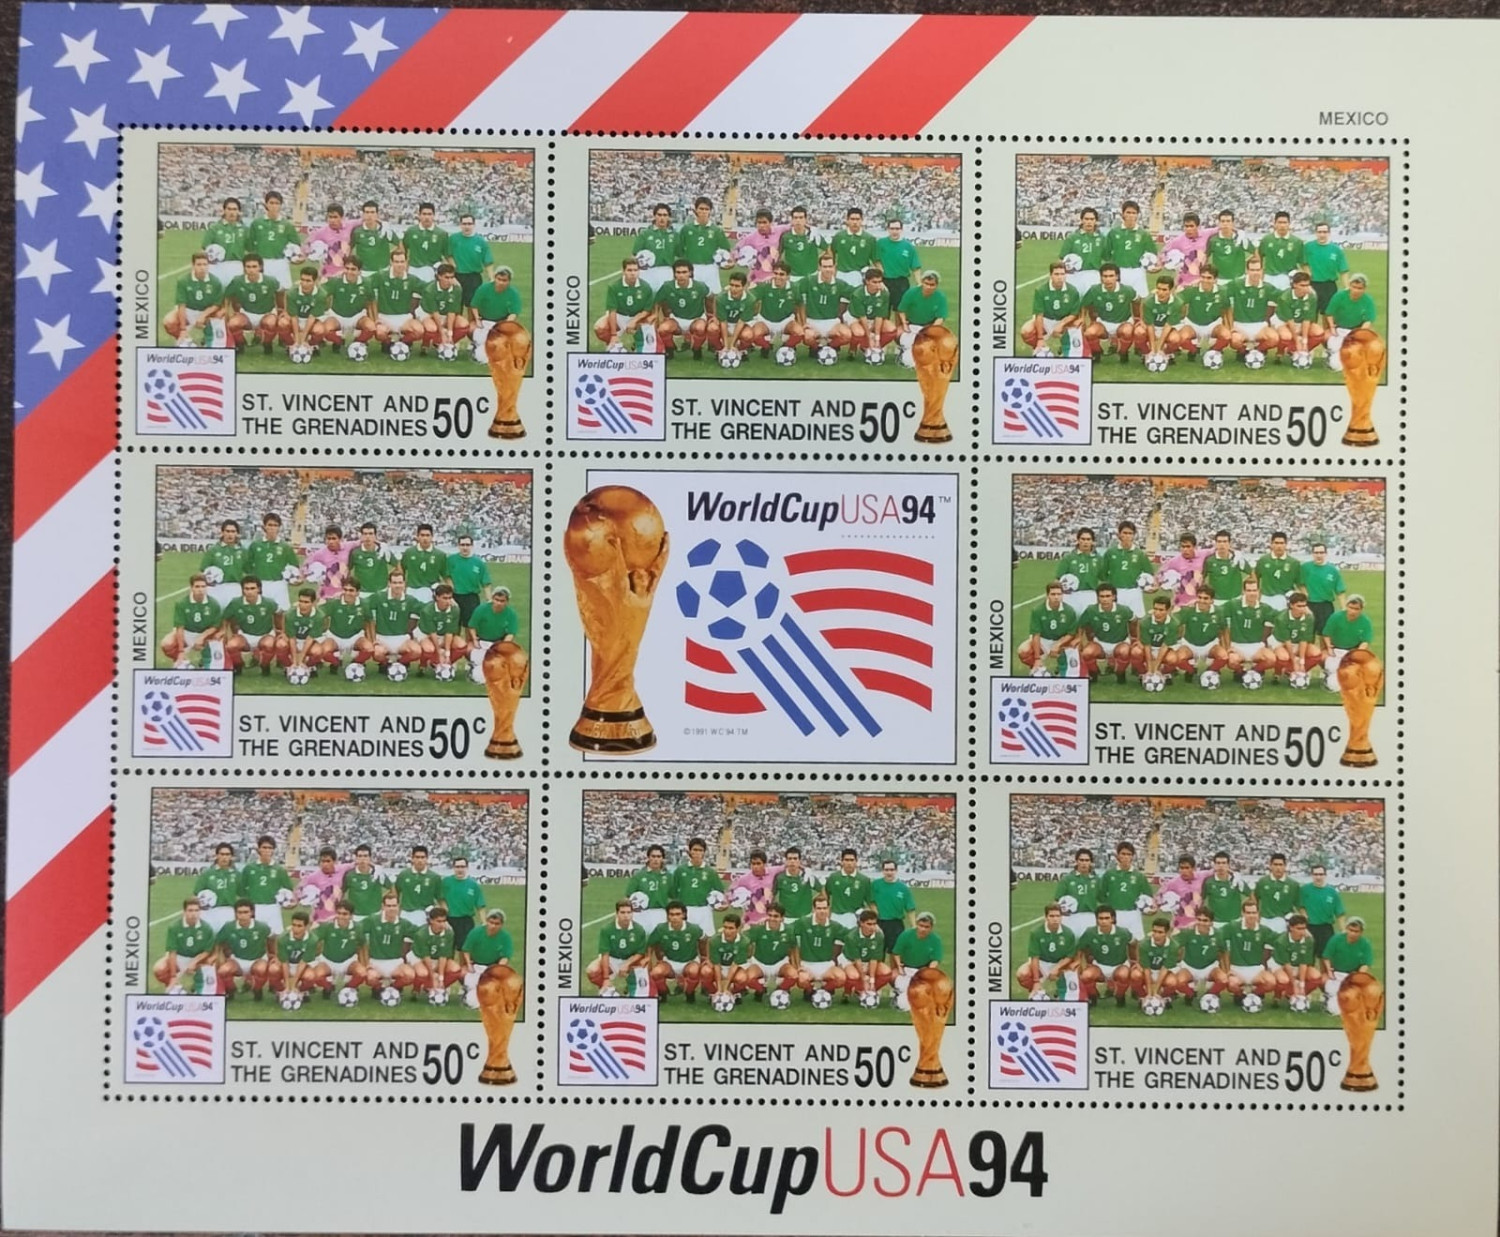 St.Vincent Football World Cup USA 94 Mexico Stamps M/S MNH